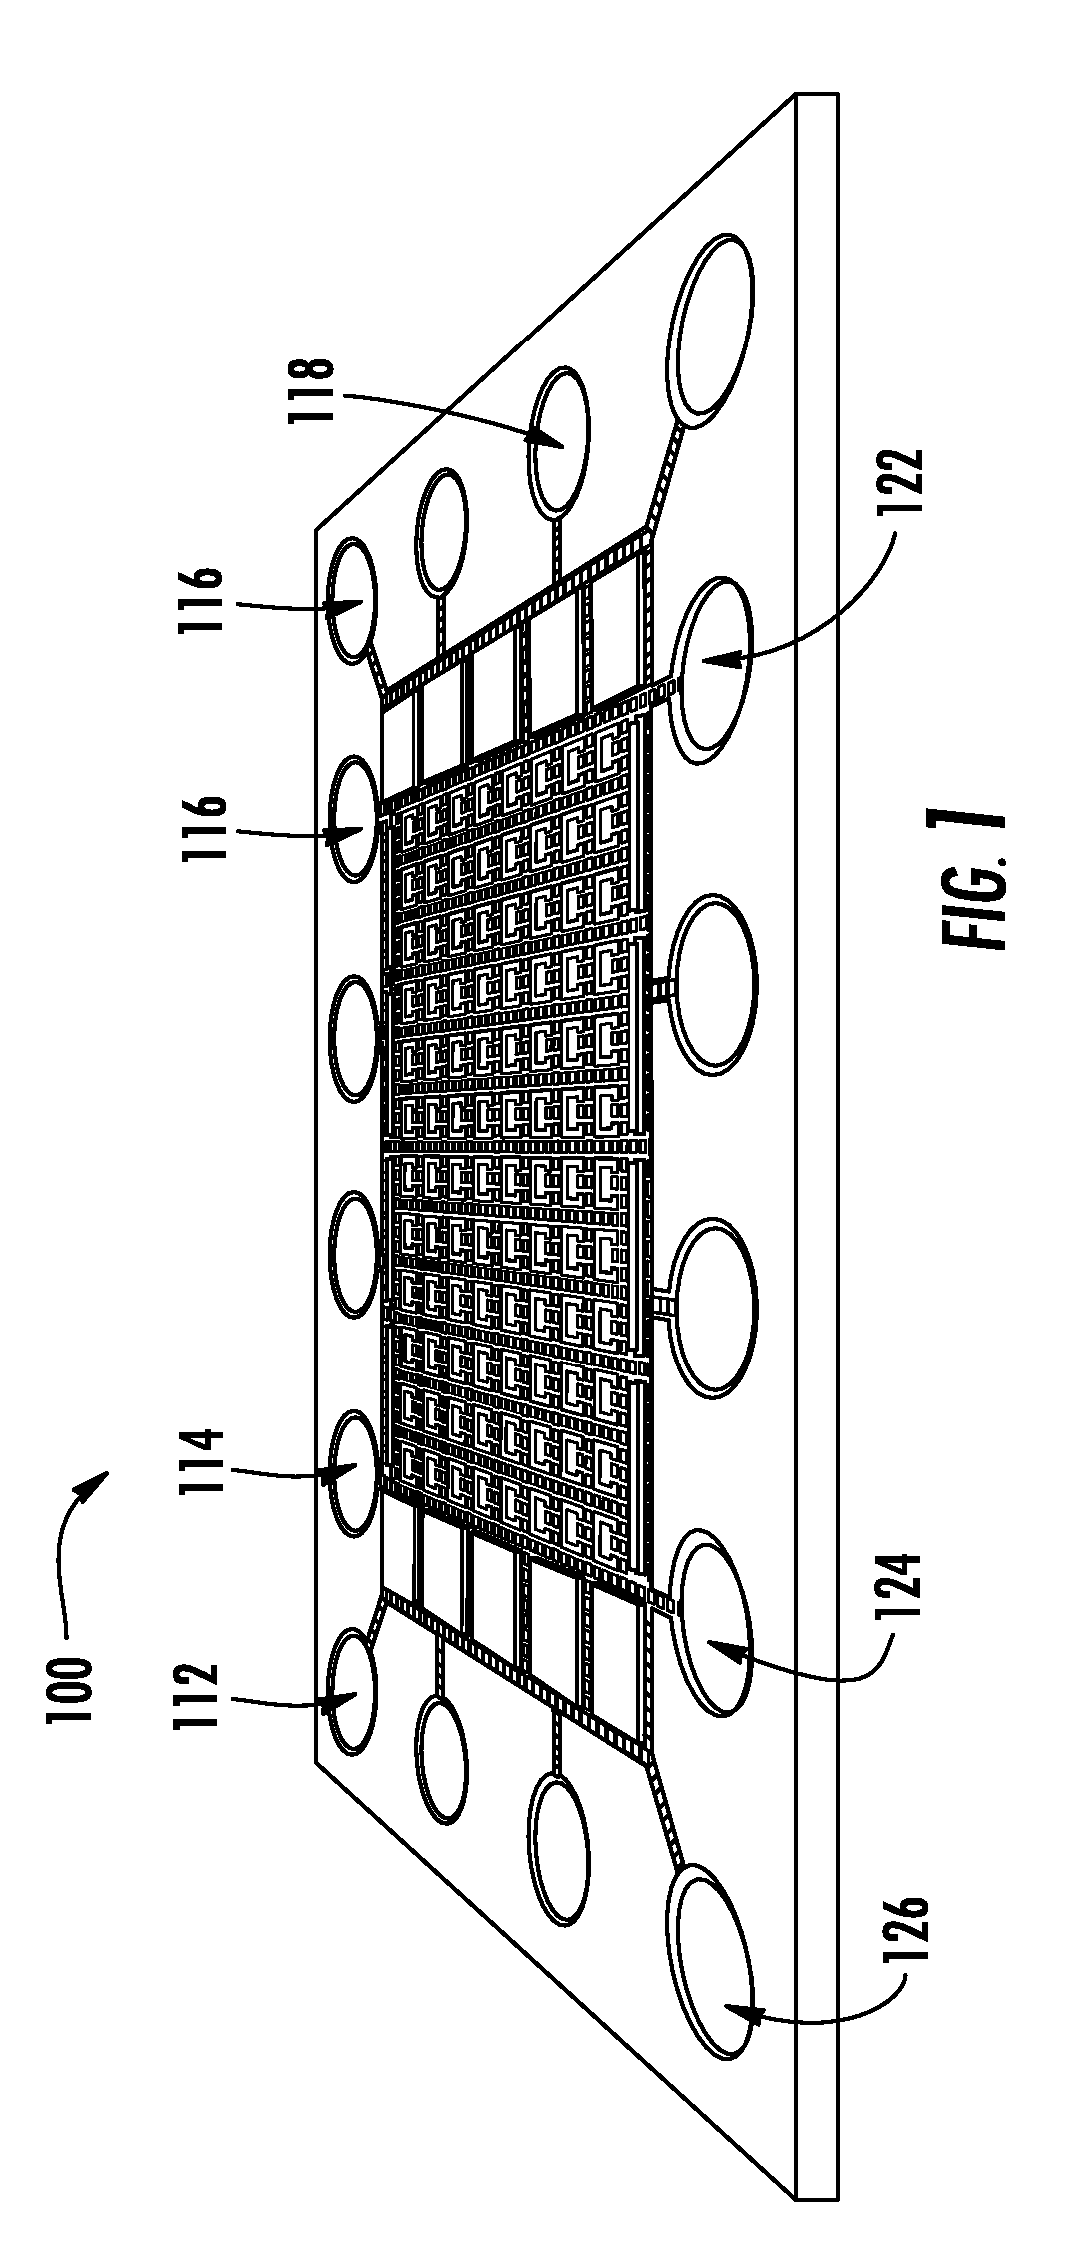 Method of electrowetting droplet operations for protein crystallization